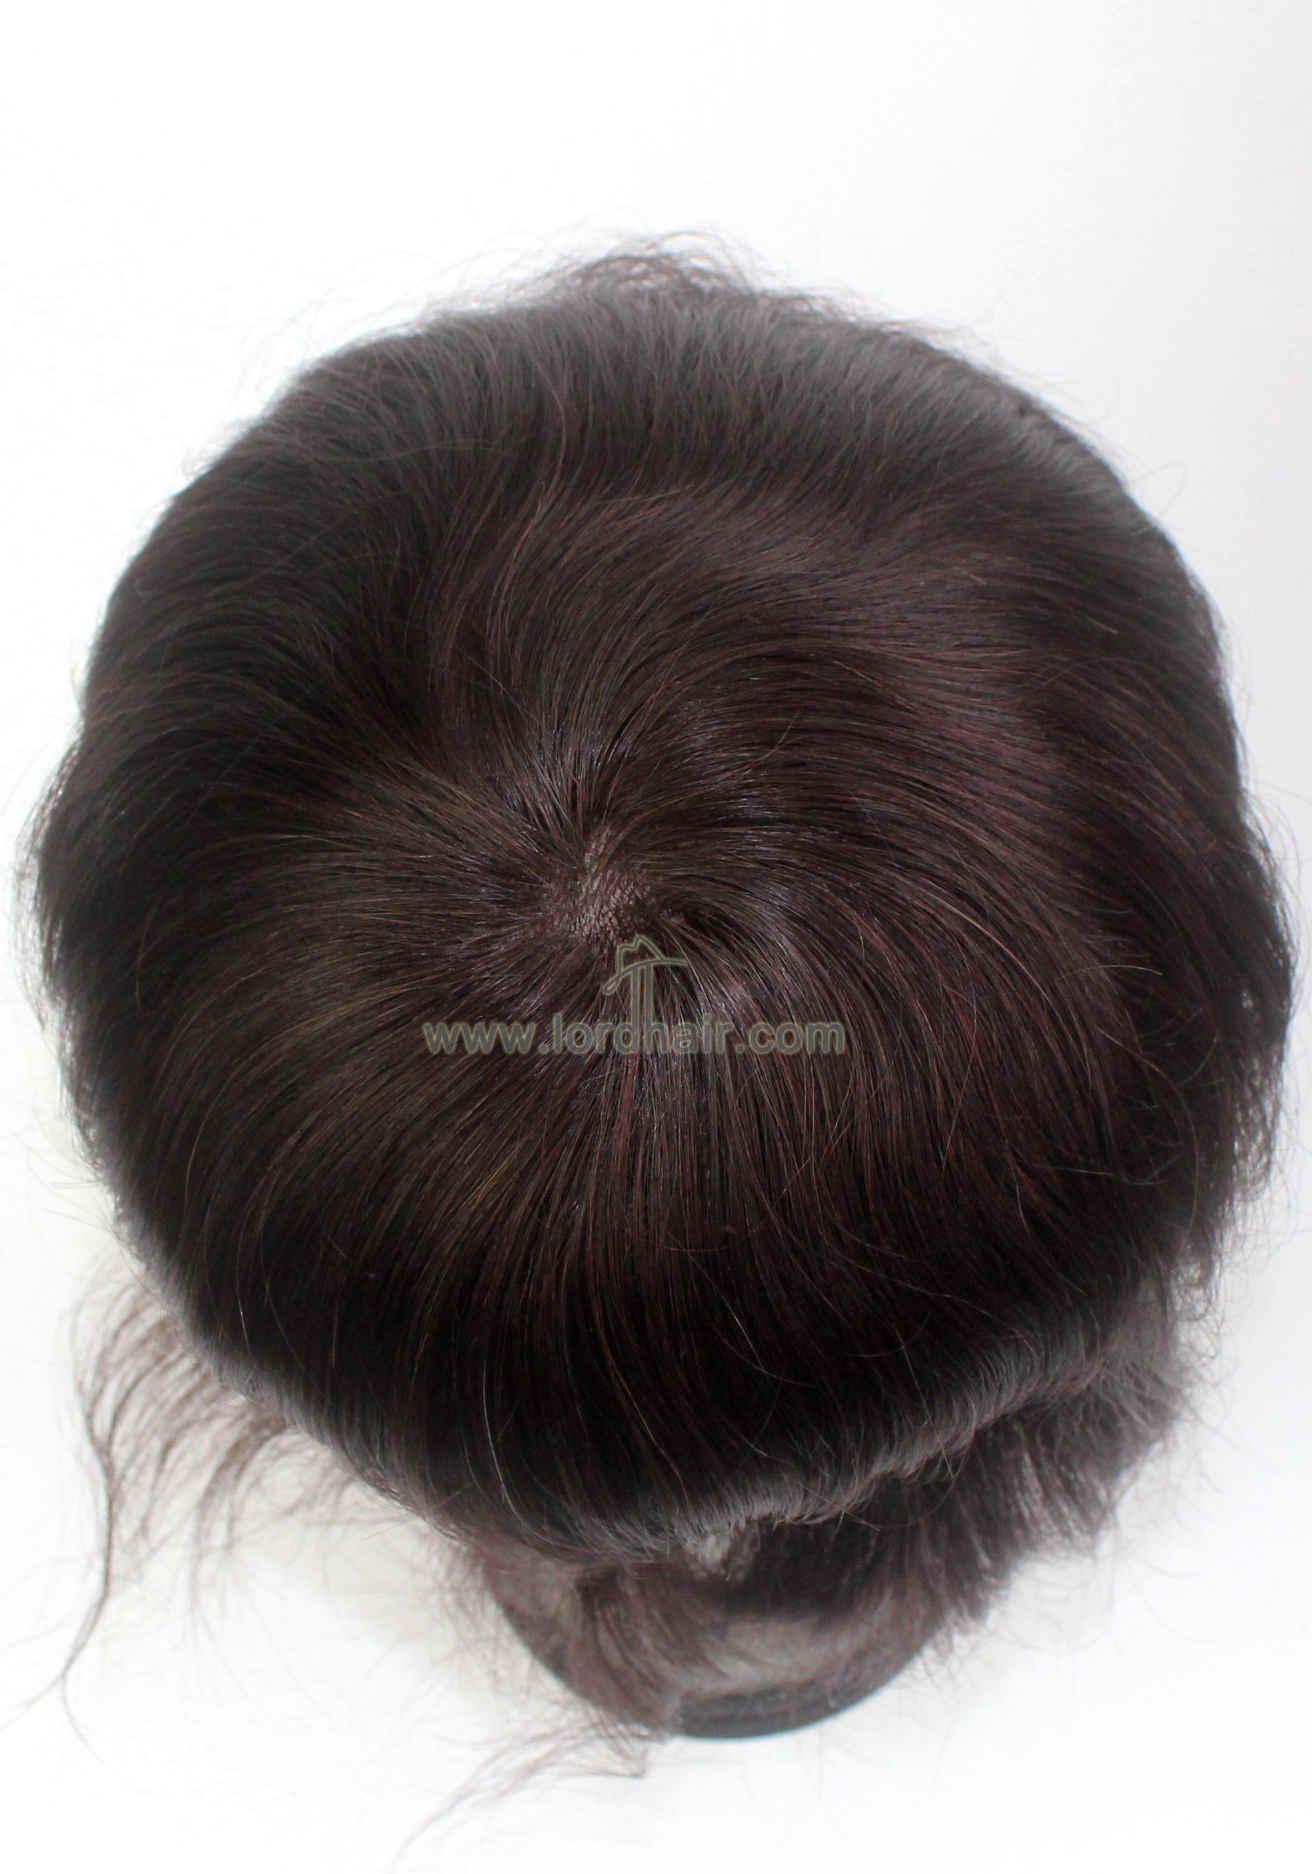 YJ874: Super Fine Mono Thin Skin Perimeter Lace Front Hair Replacement